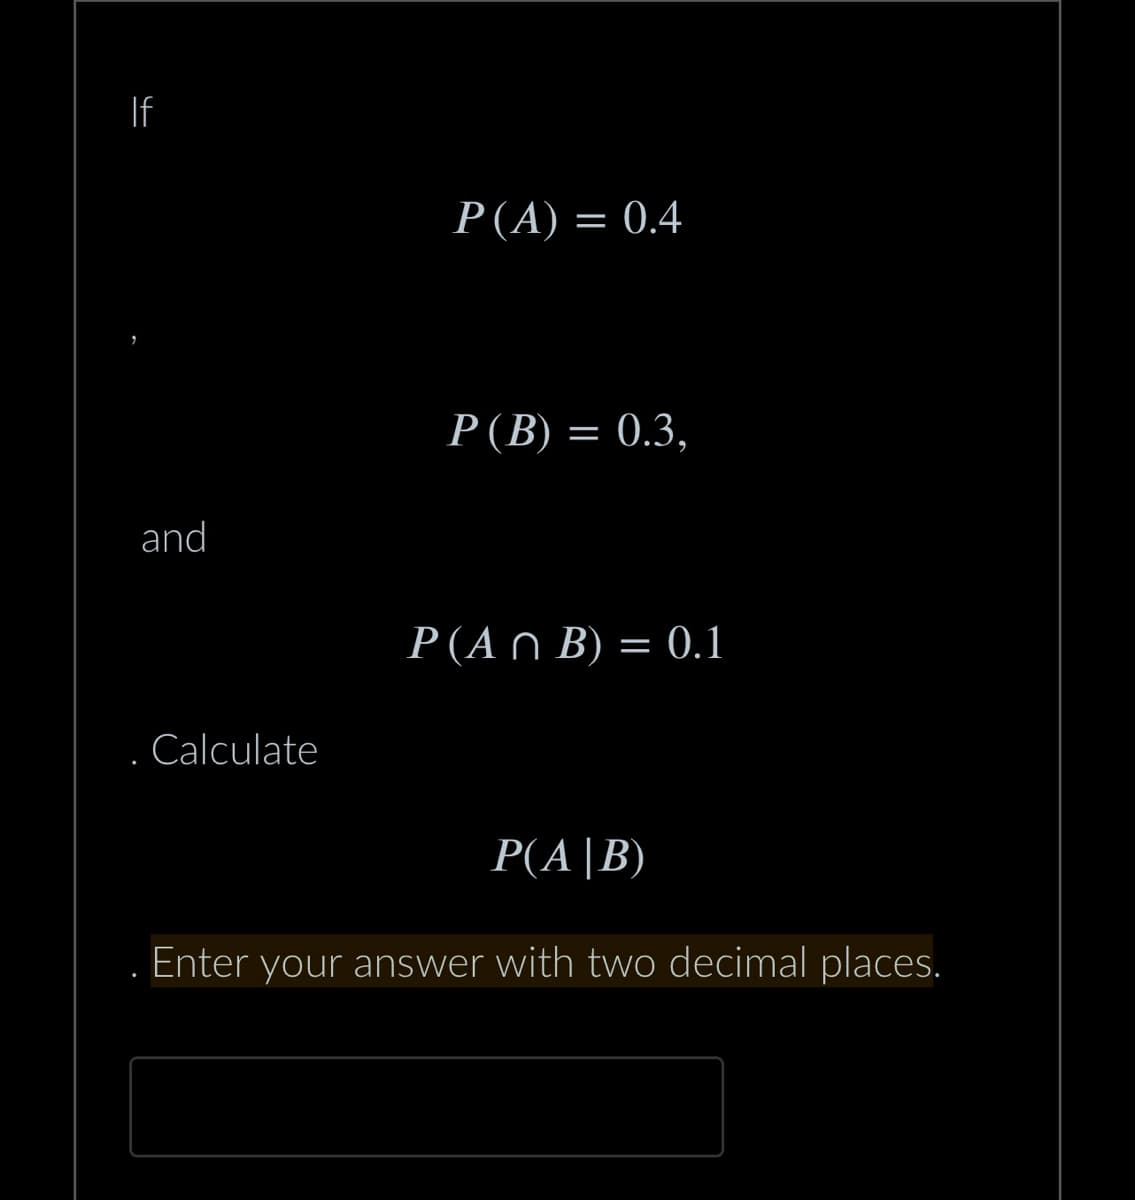 If
and
Calculate
P(A) = 0.4
P (B) = 0.3,
P(An B) = 0.1
P(A|B)
Enter your answer with two decimal places.